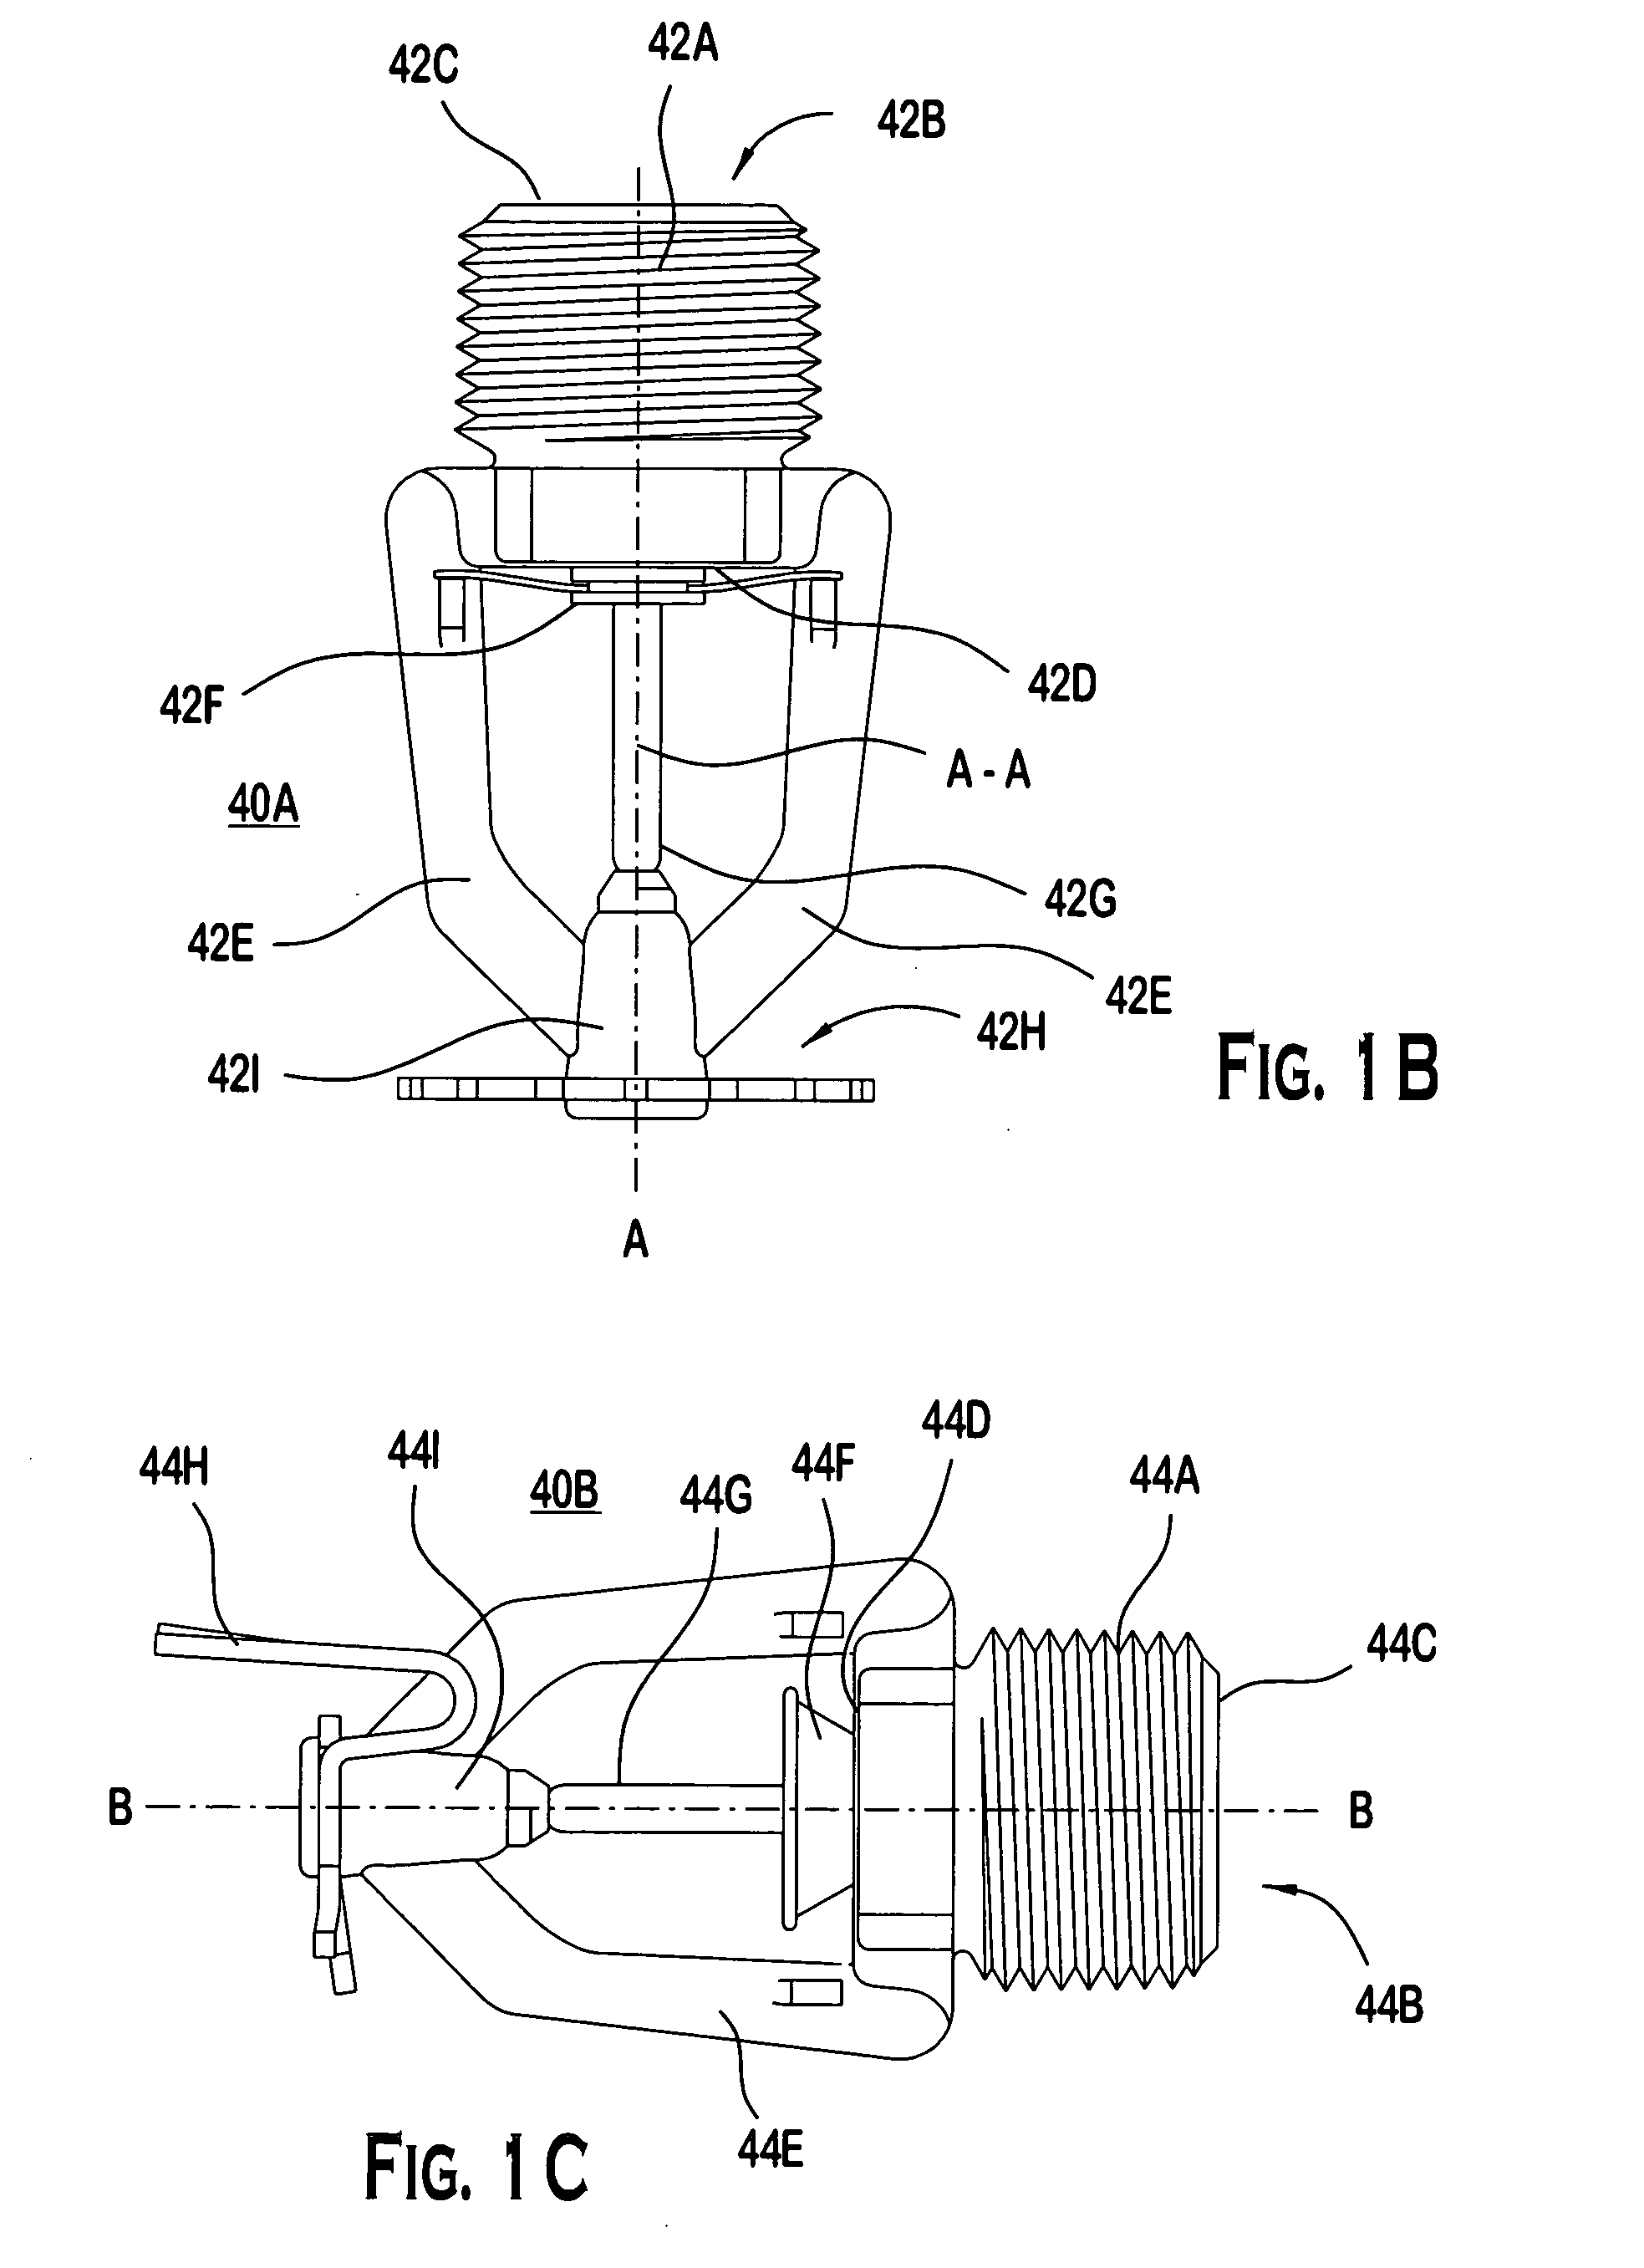 Non-interlock, preaction residential dry sprinkler fire protection system with a releasing control panel